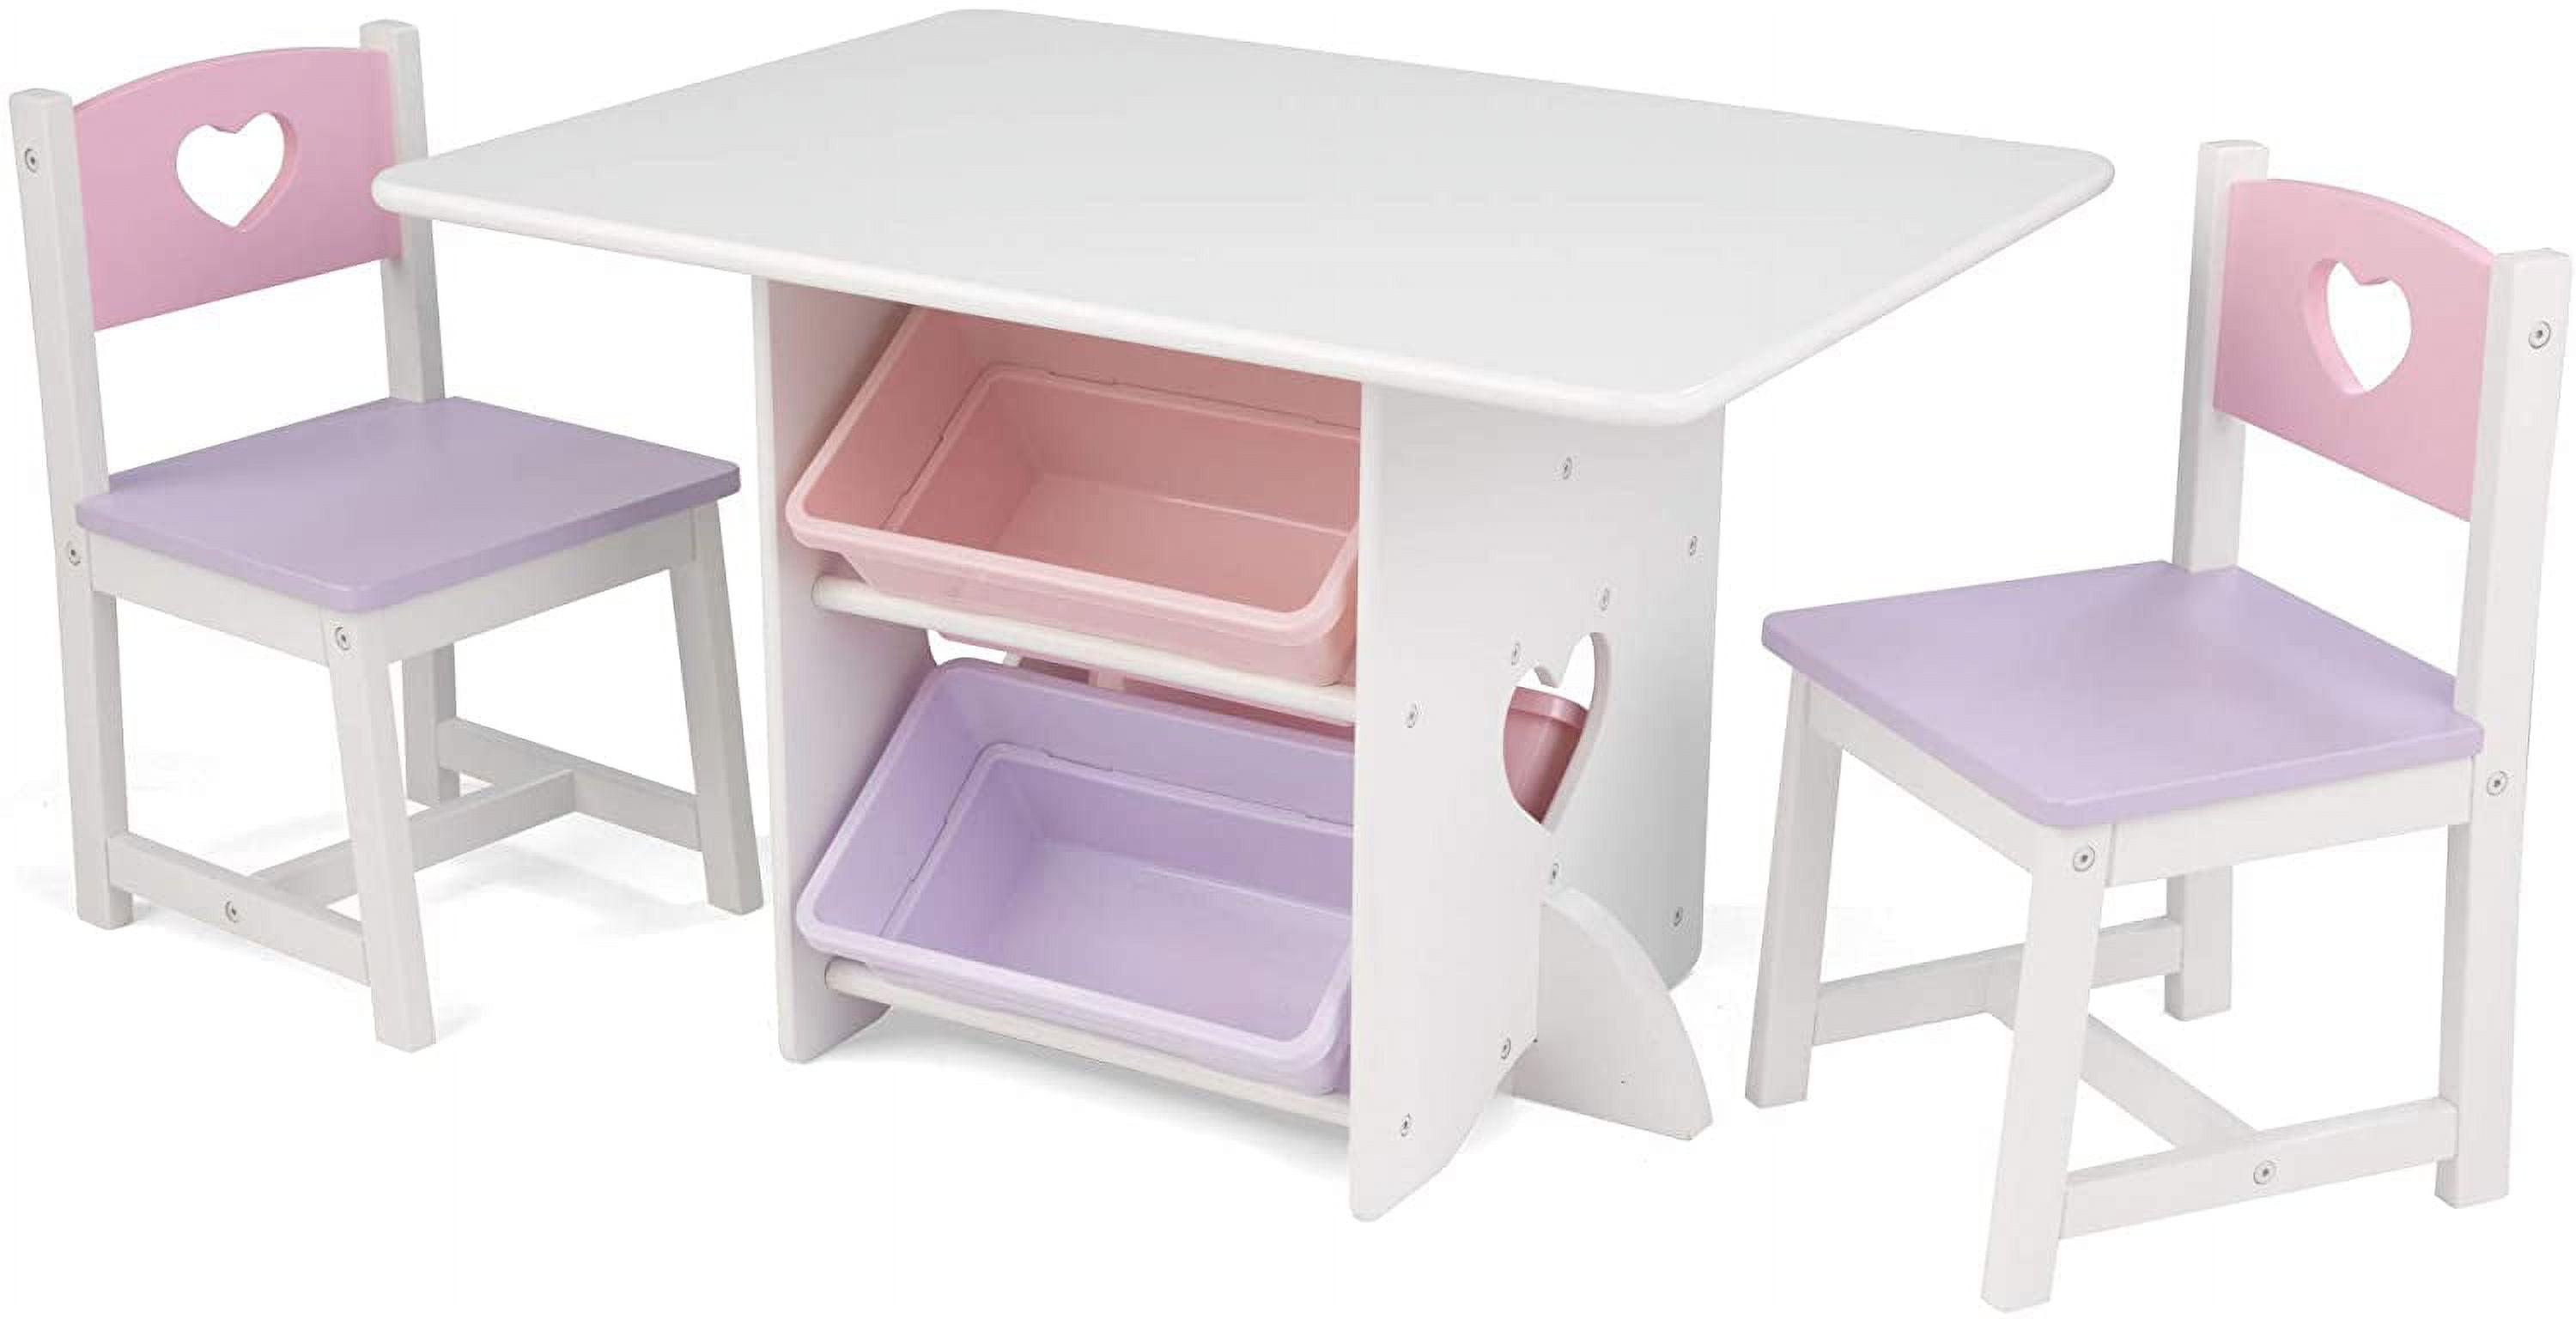 Pastel Heart Wooden Kids' Table & Chair Set with Storage Bins